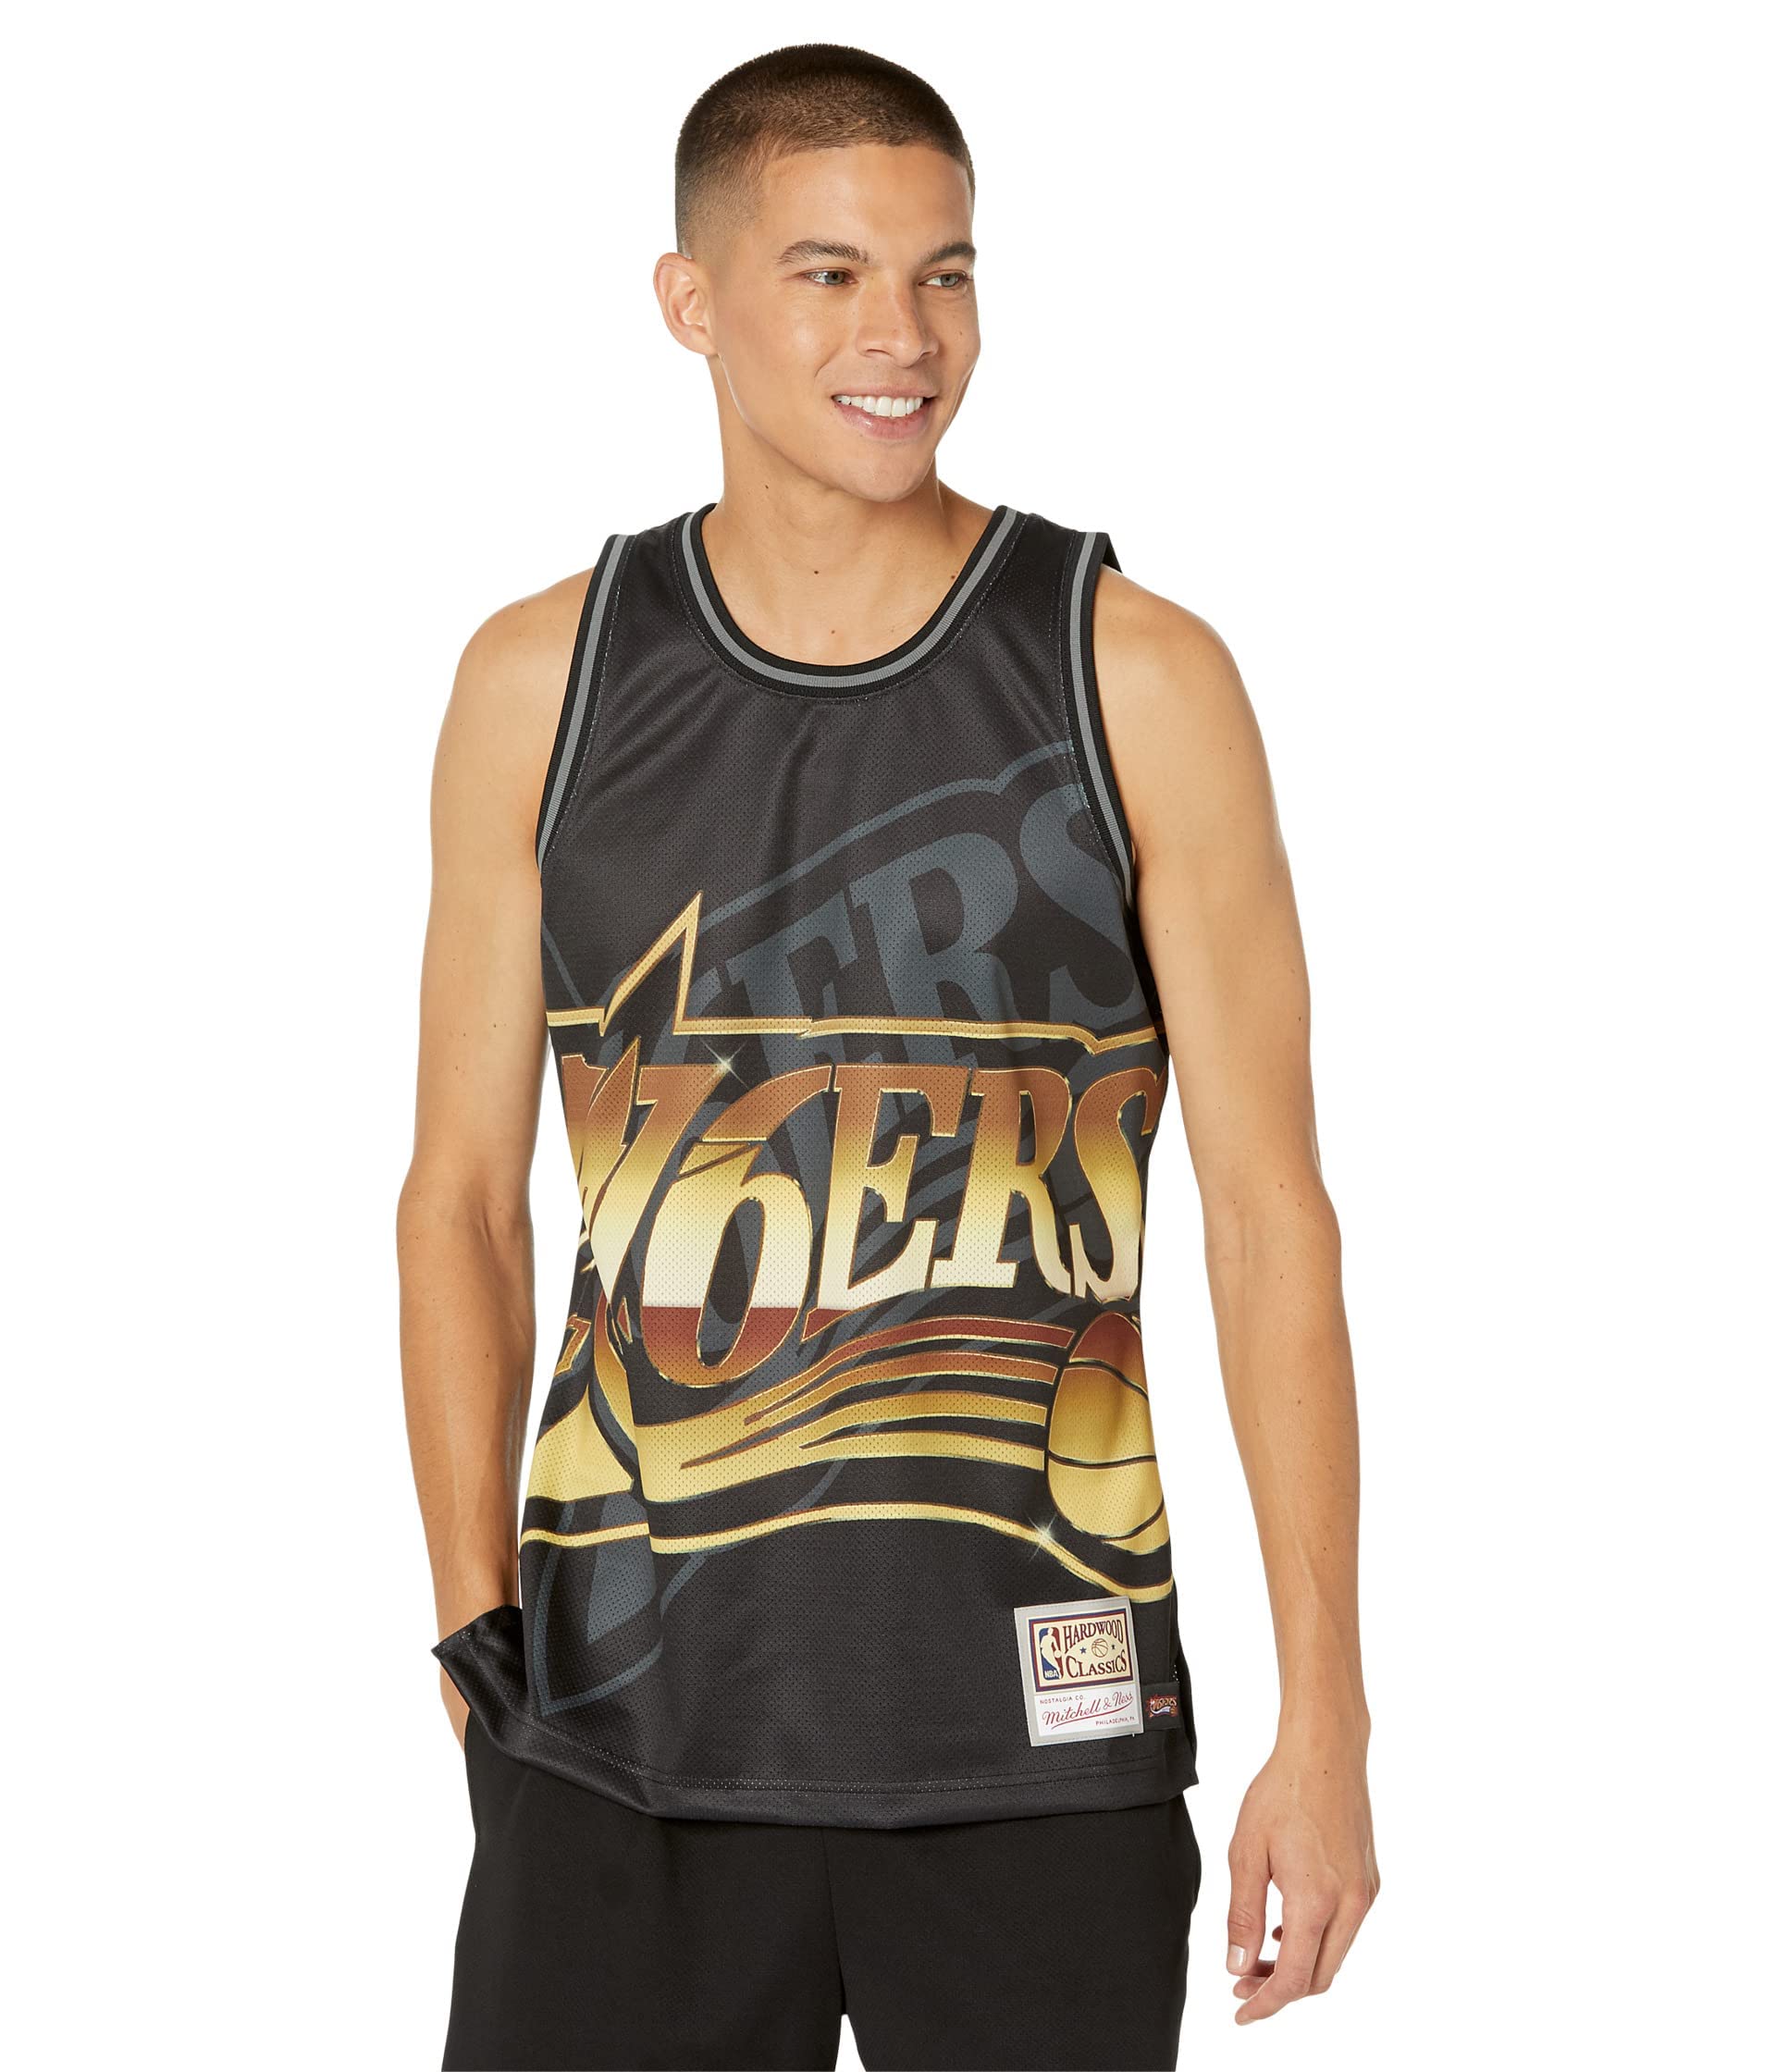 Mitchell & Ness Big Face 4.0 Fashion Tank - Los Angeles Lakers, XL